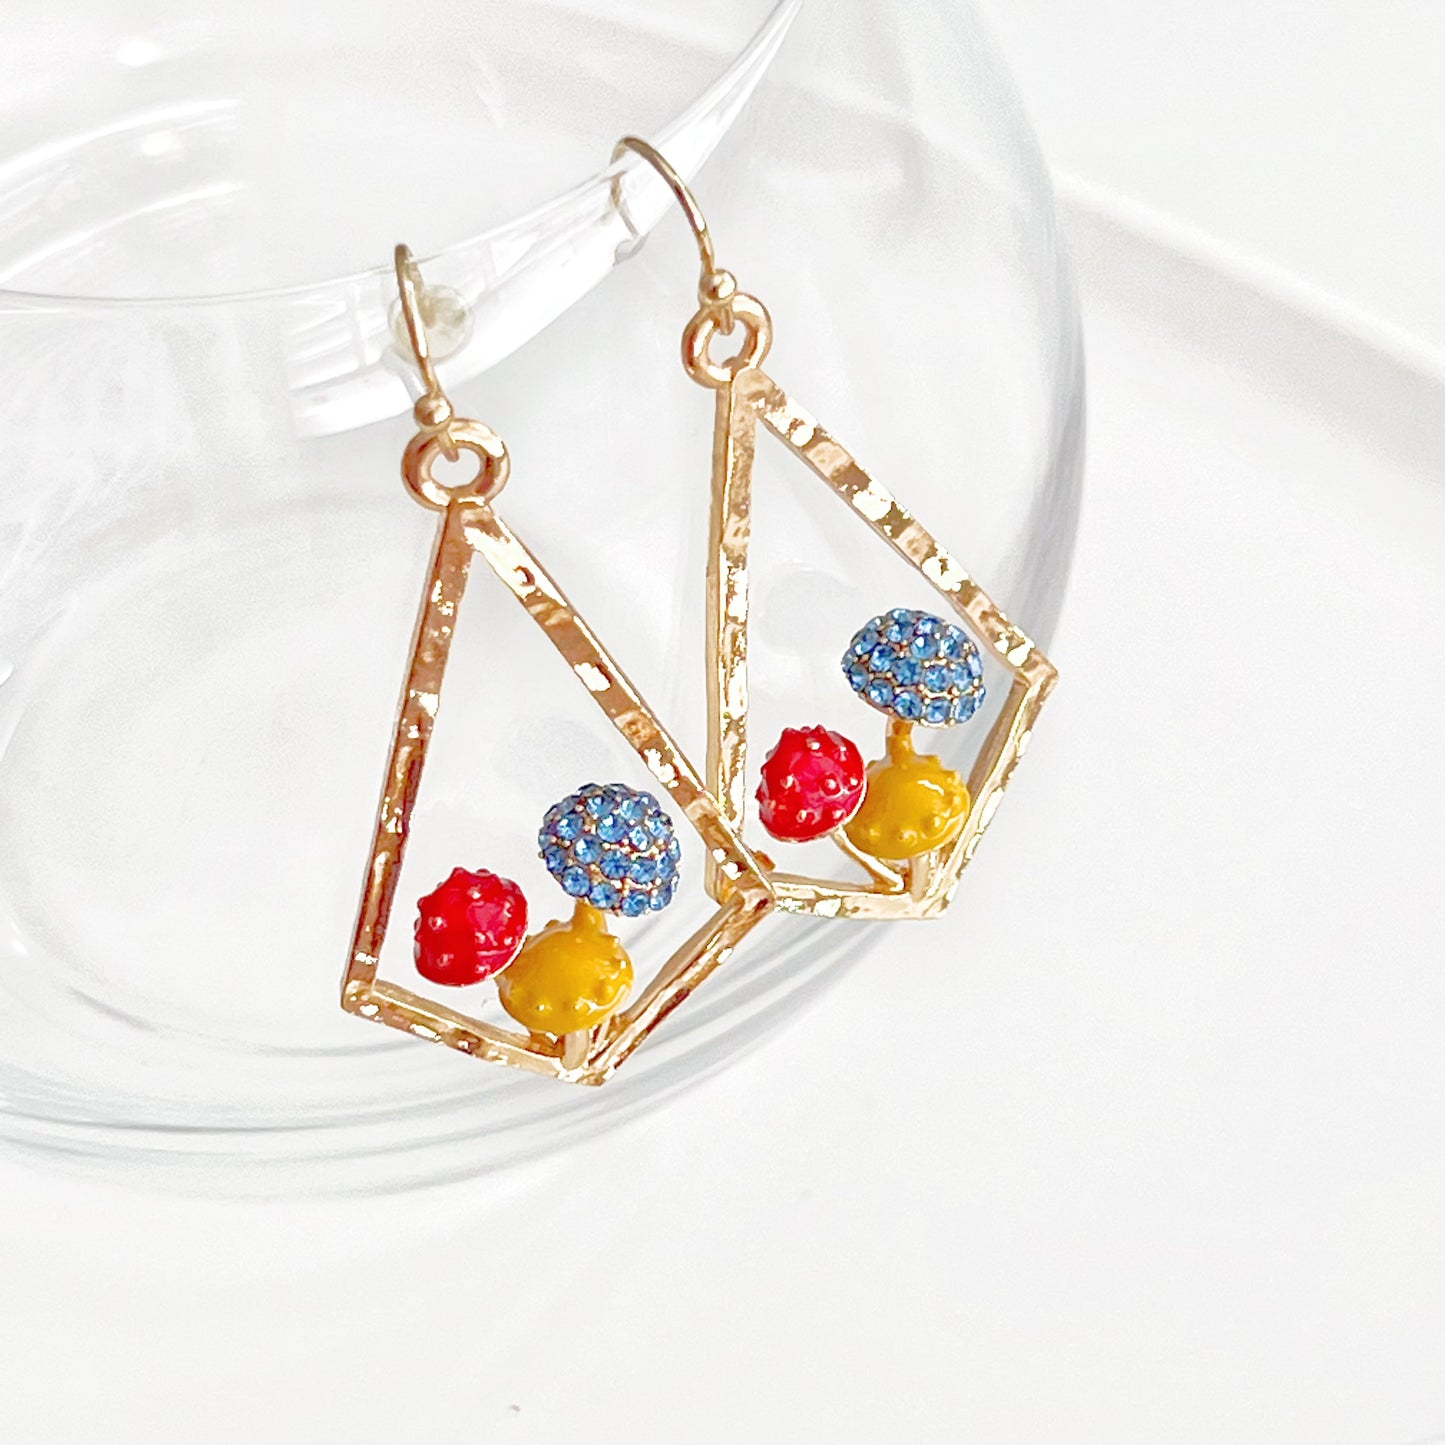 Red Fly Agaric Mushrooms in Gold Diamond Frame Good Luck Earrings-Ninaouity